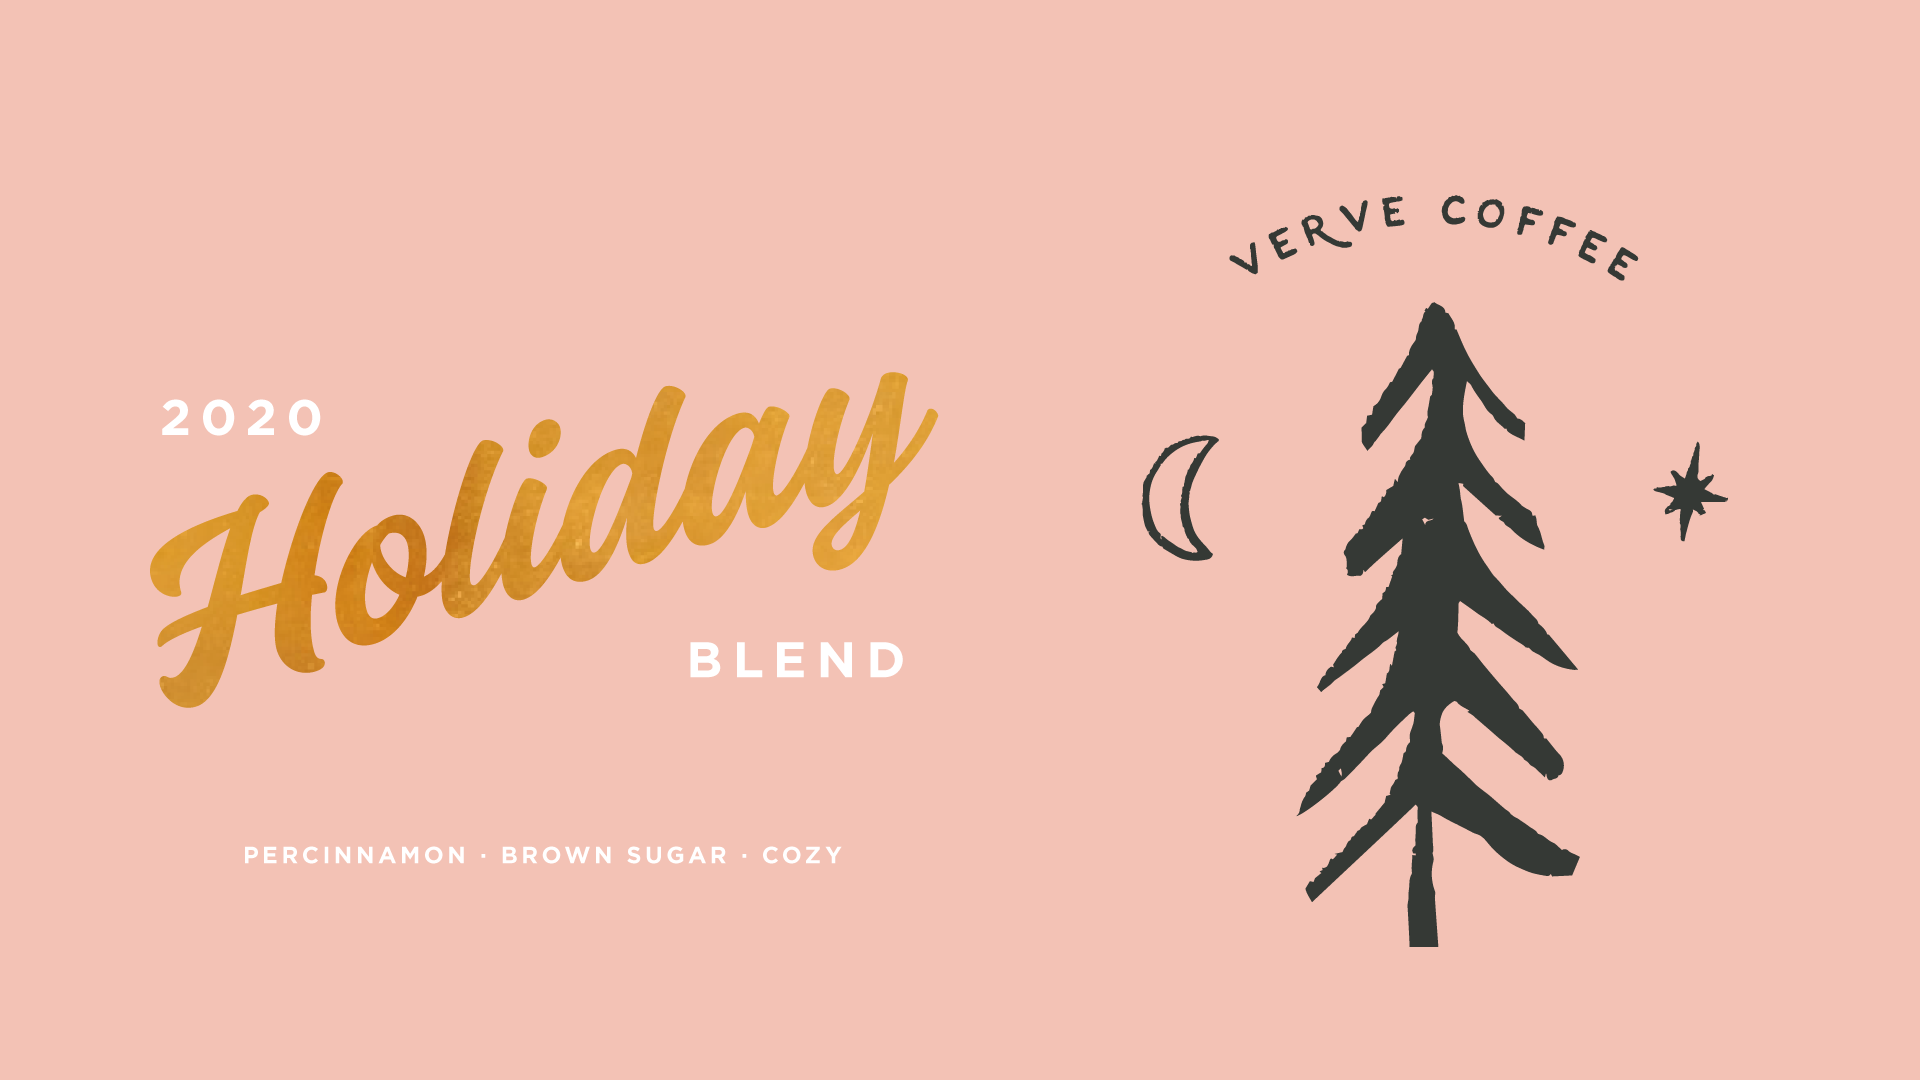 2020 HOLIDAY BLEND